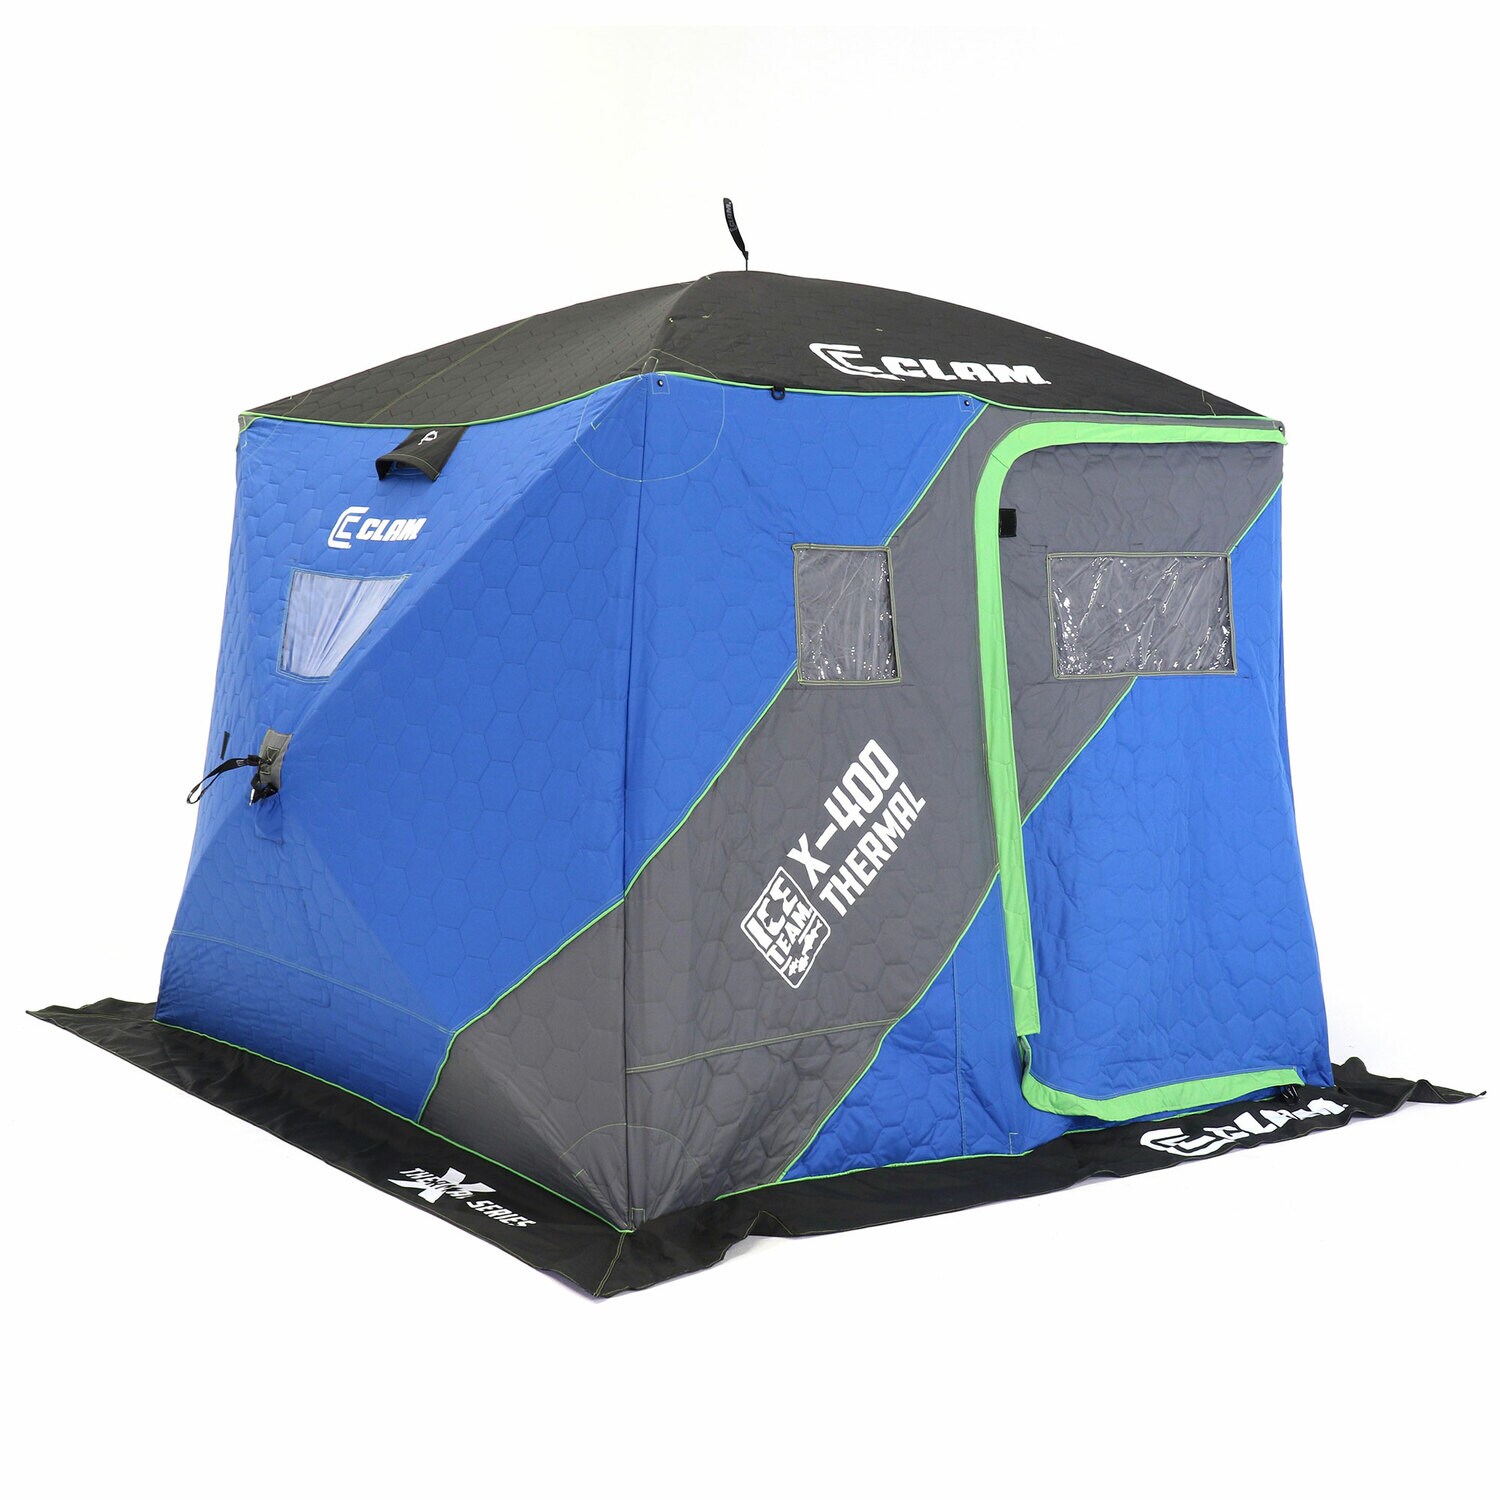 Clam Outdoors Nylon 4-Person Ice Fishing in the Tents department